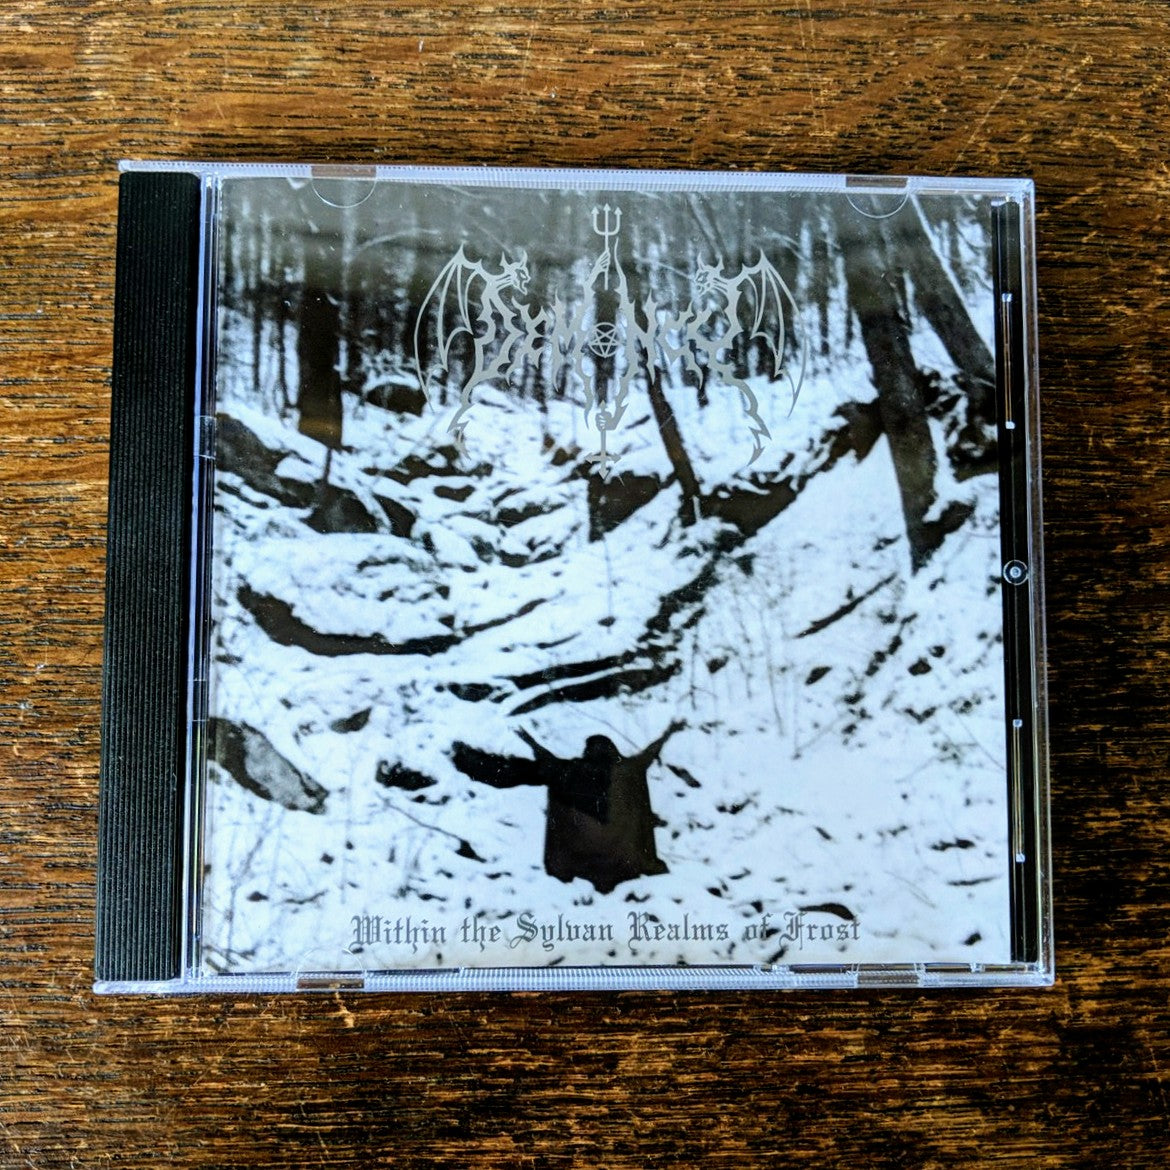 [SOLD OUT] DEMONCY "Within the Sylvan Realms of Frost" CD